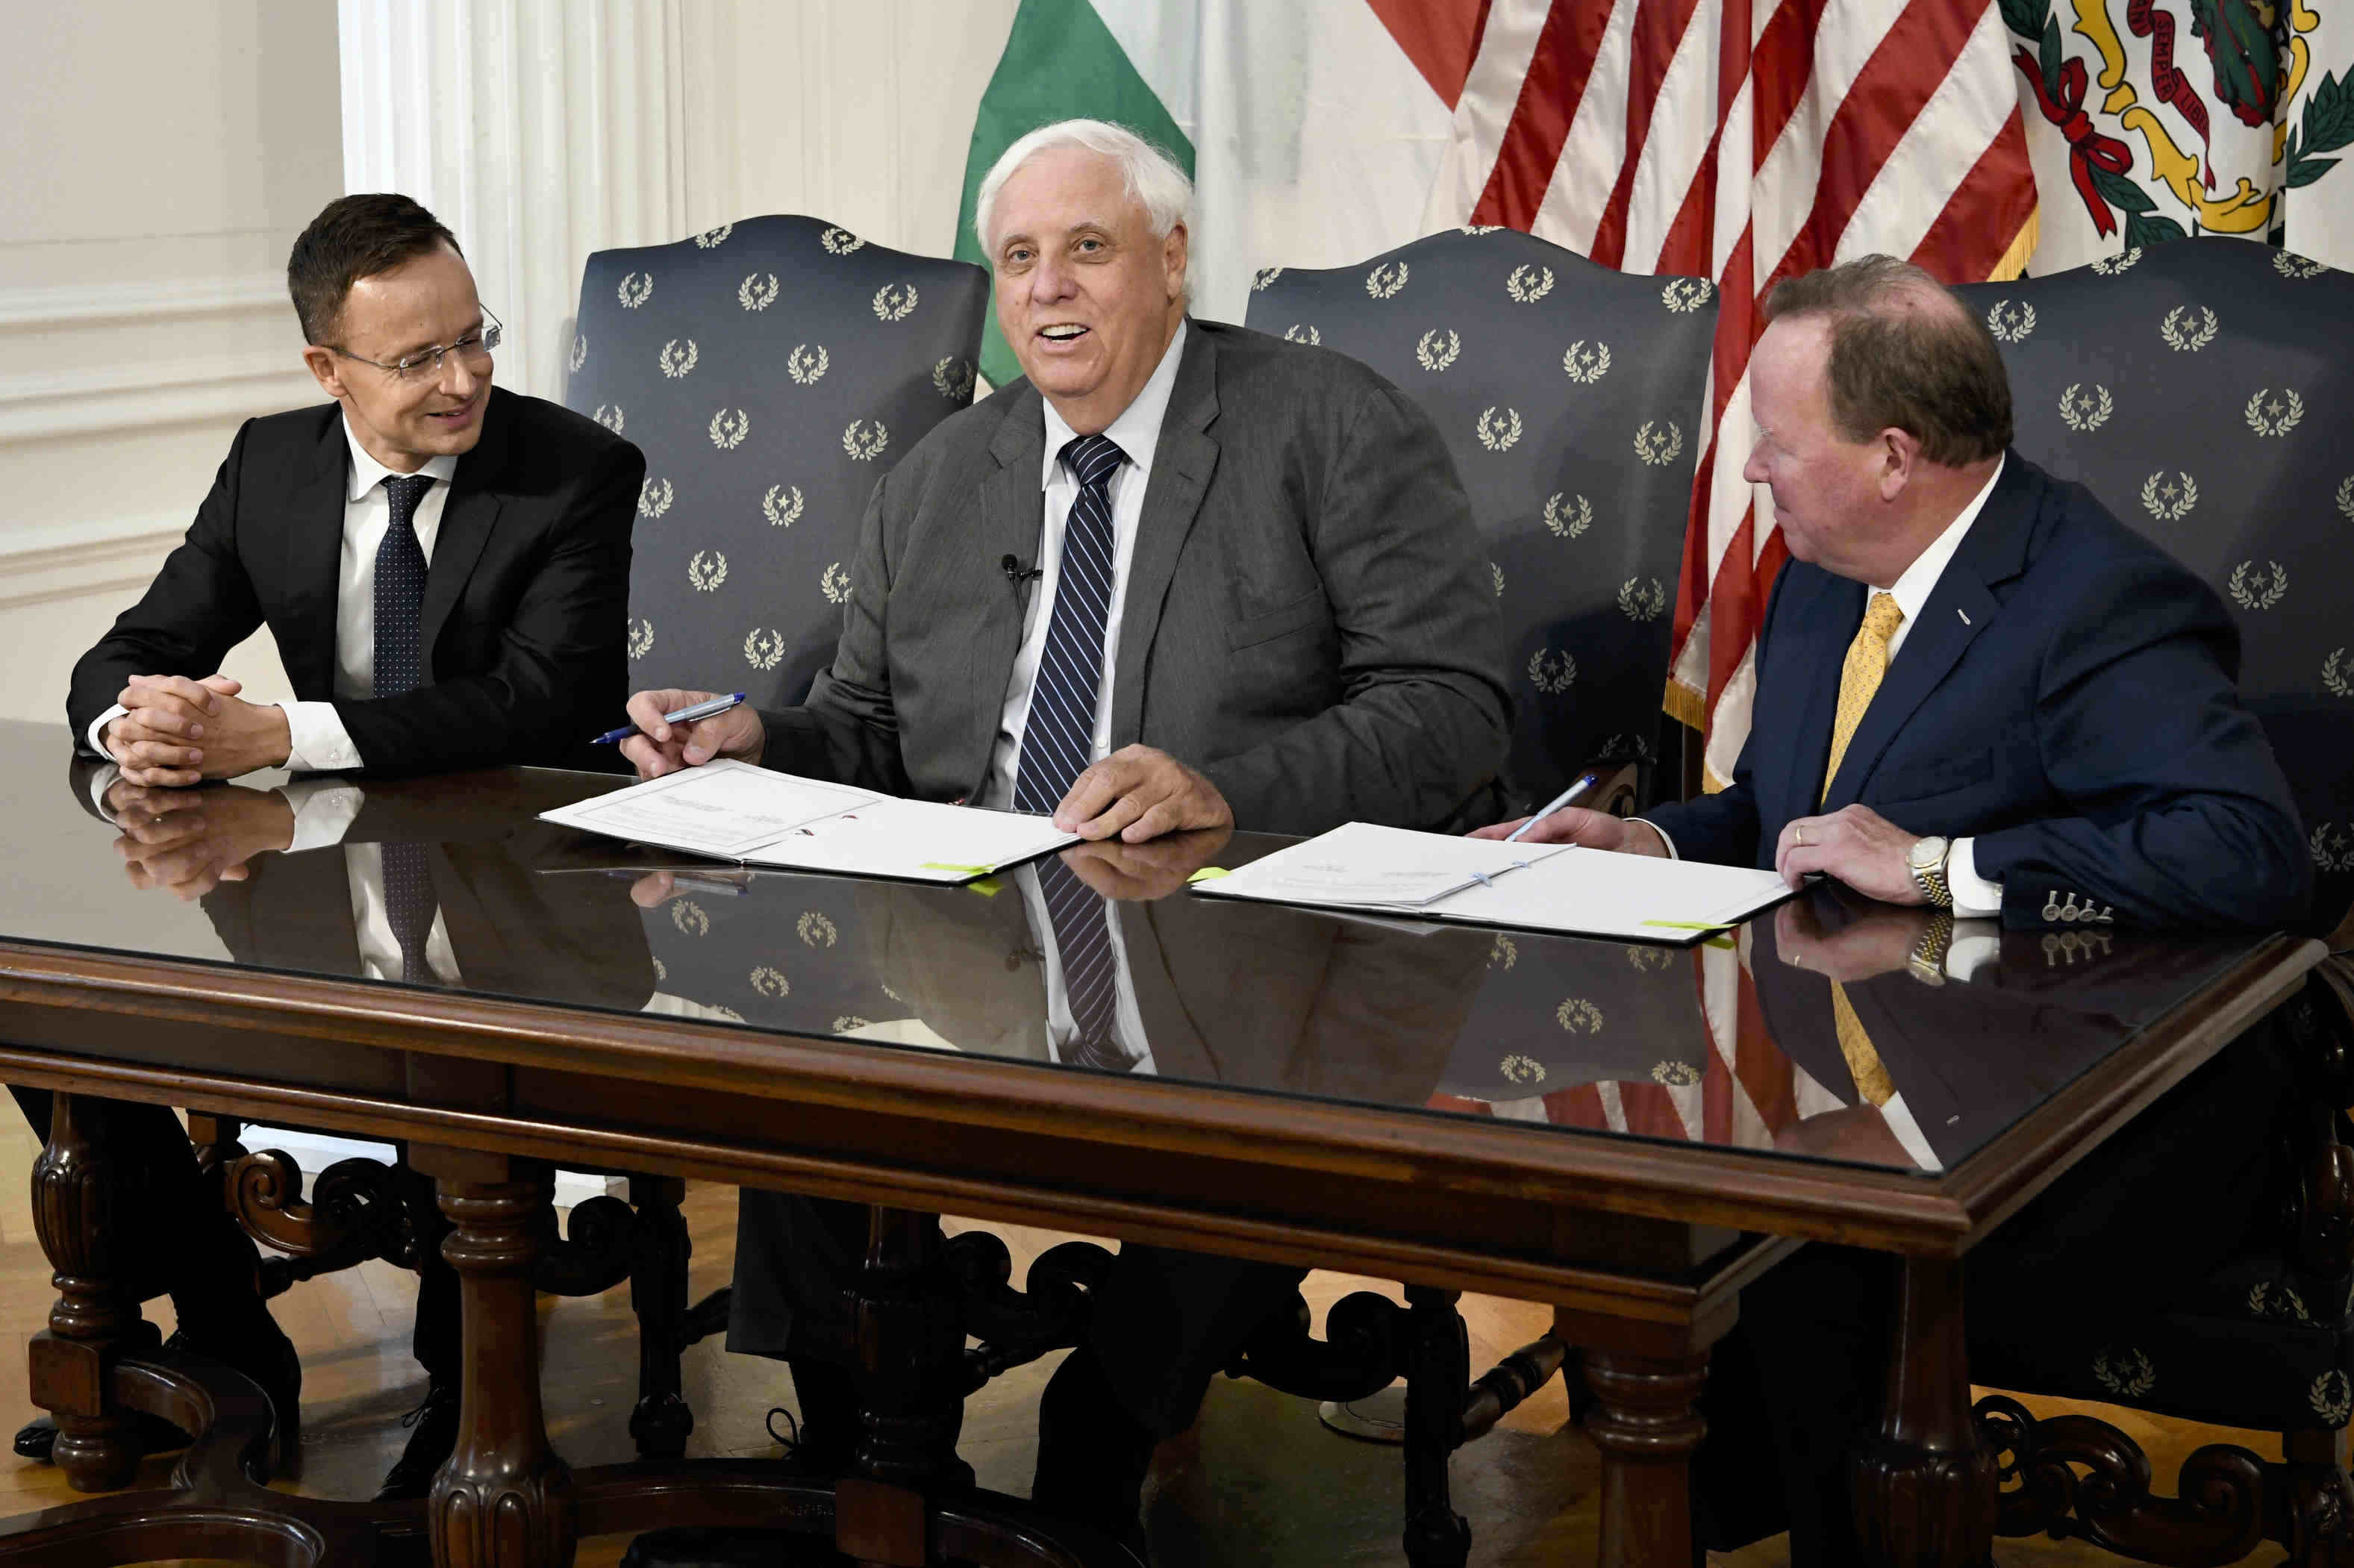 Hungary to sign economic cooperation agreement with West Virginia